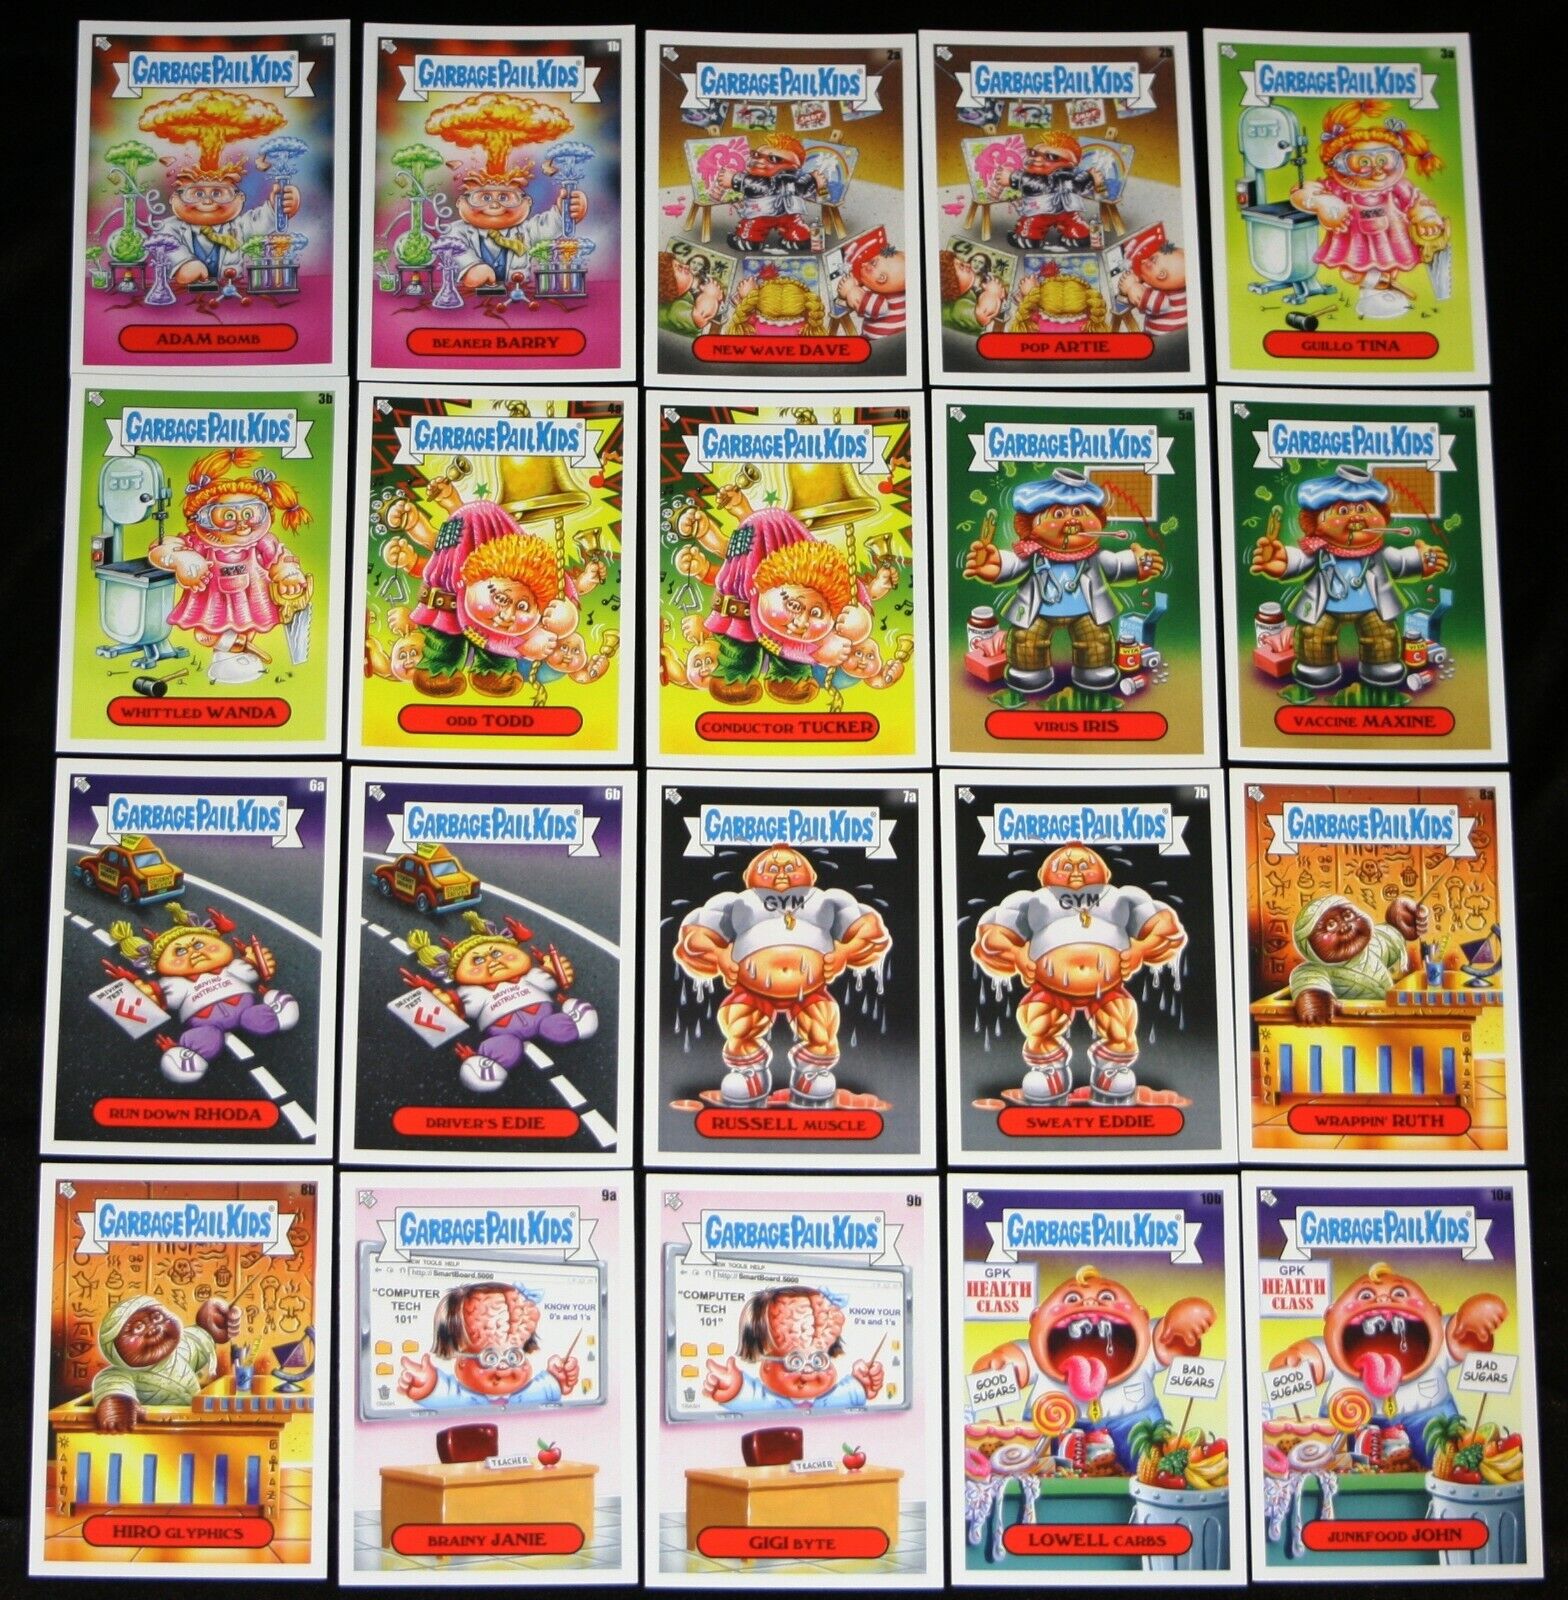 2020 GARBAGE PAIL KIDS LATE TO SCHOOL CLASS FACULTY LOUNGE 20 CARD SET ADAM BOMB